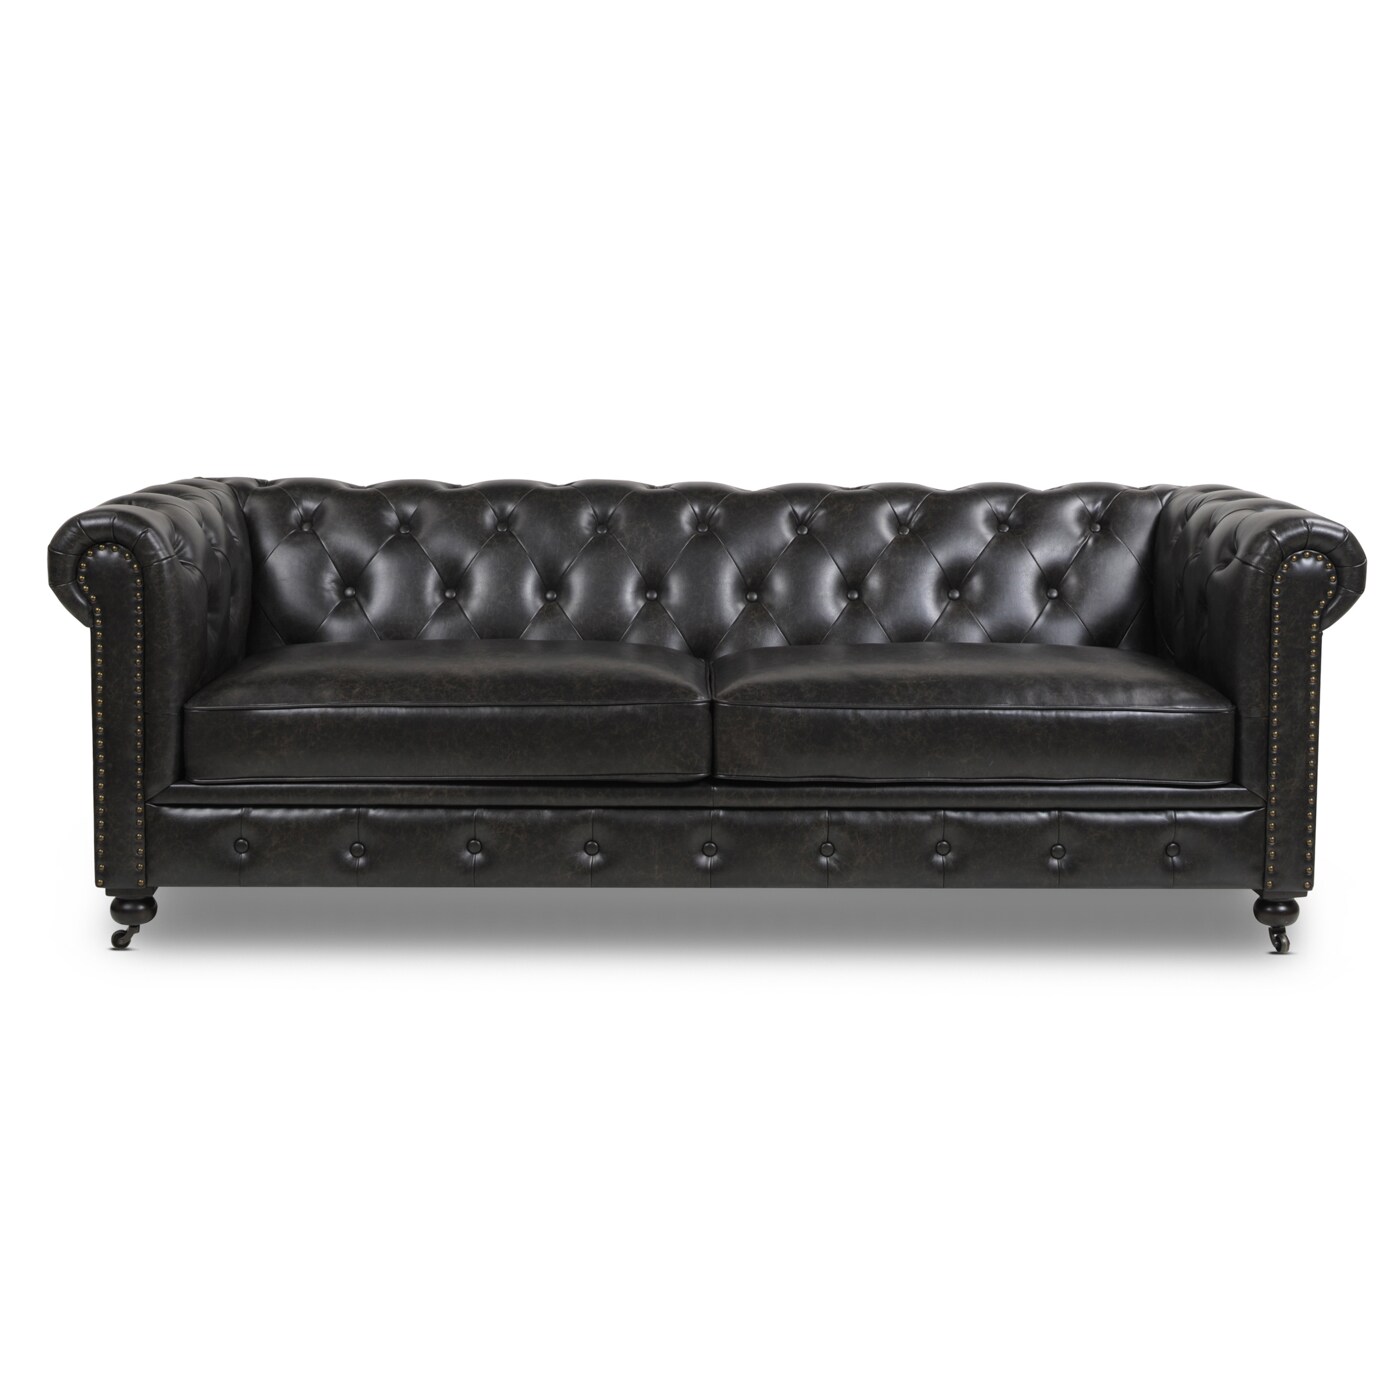 Sofas Loveseats Department At, Tufted Leather Chesterfield Sofa